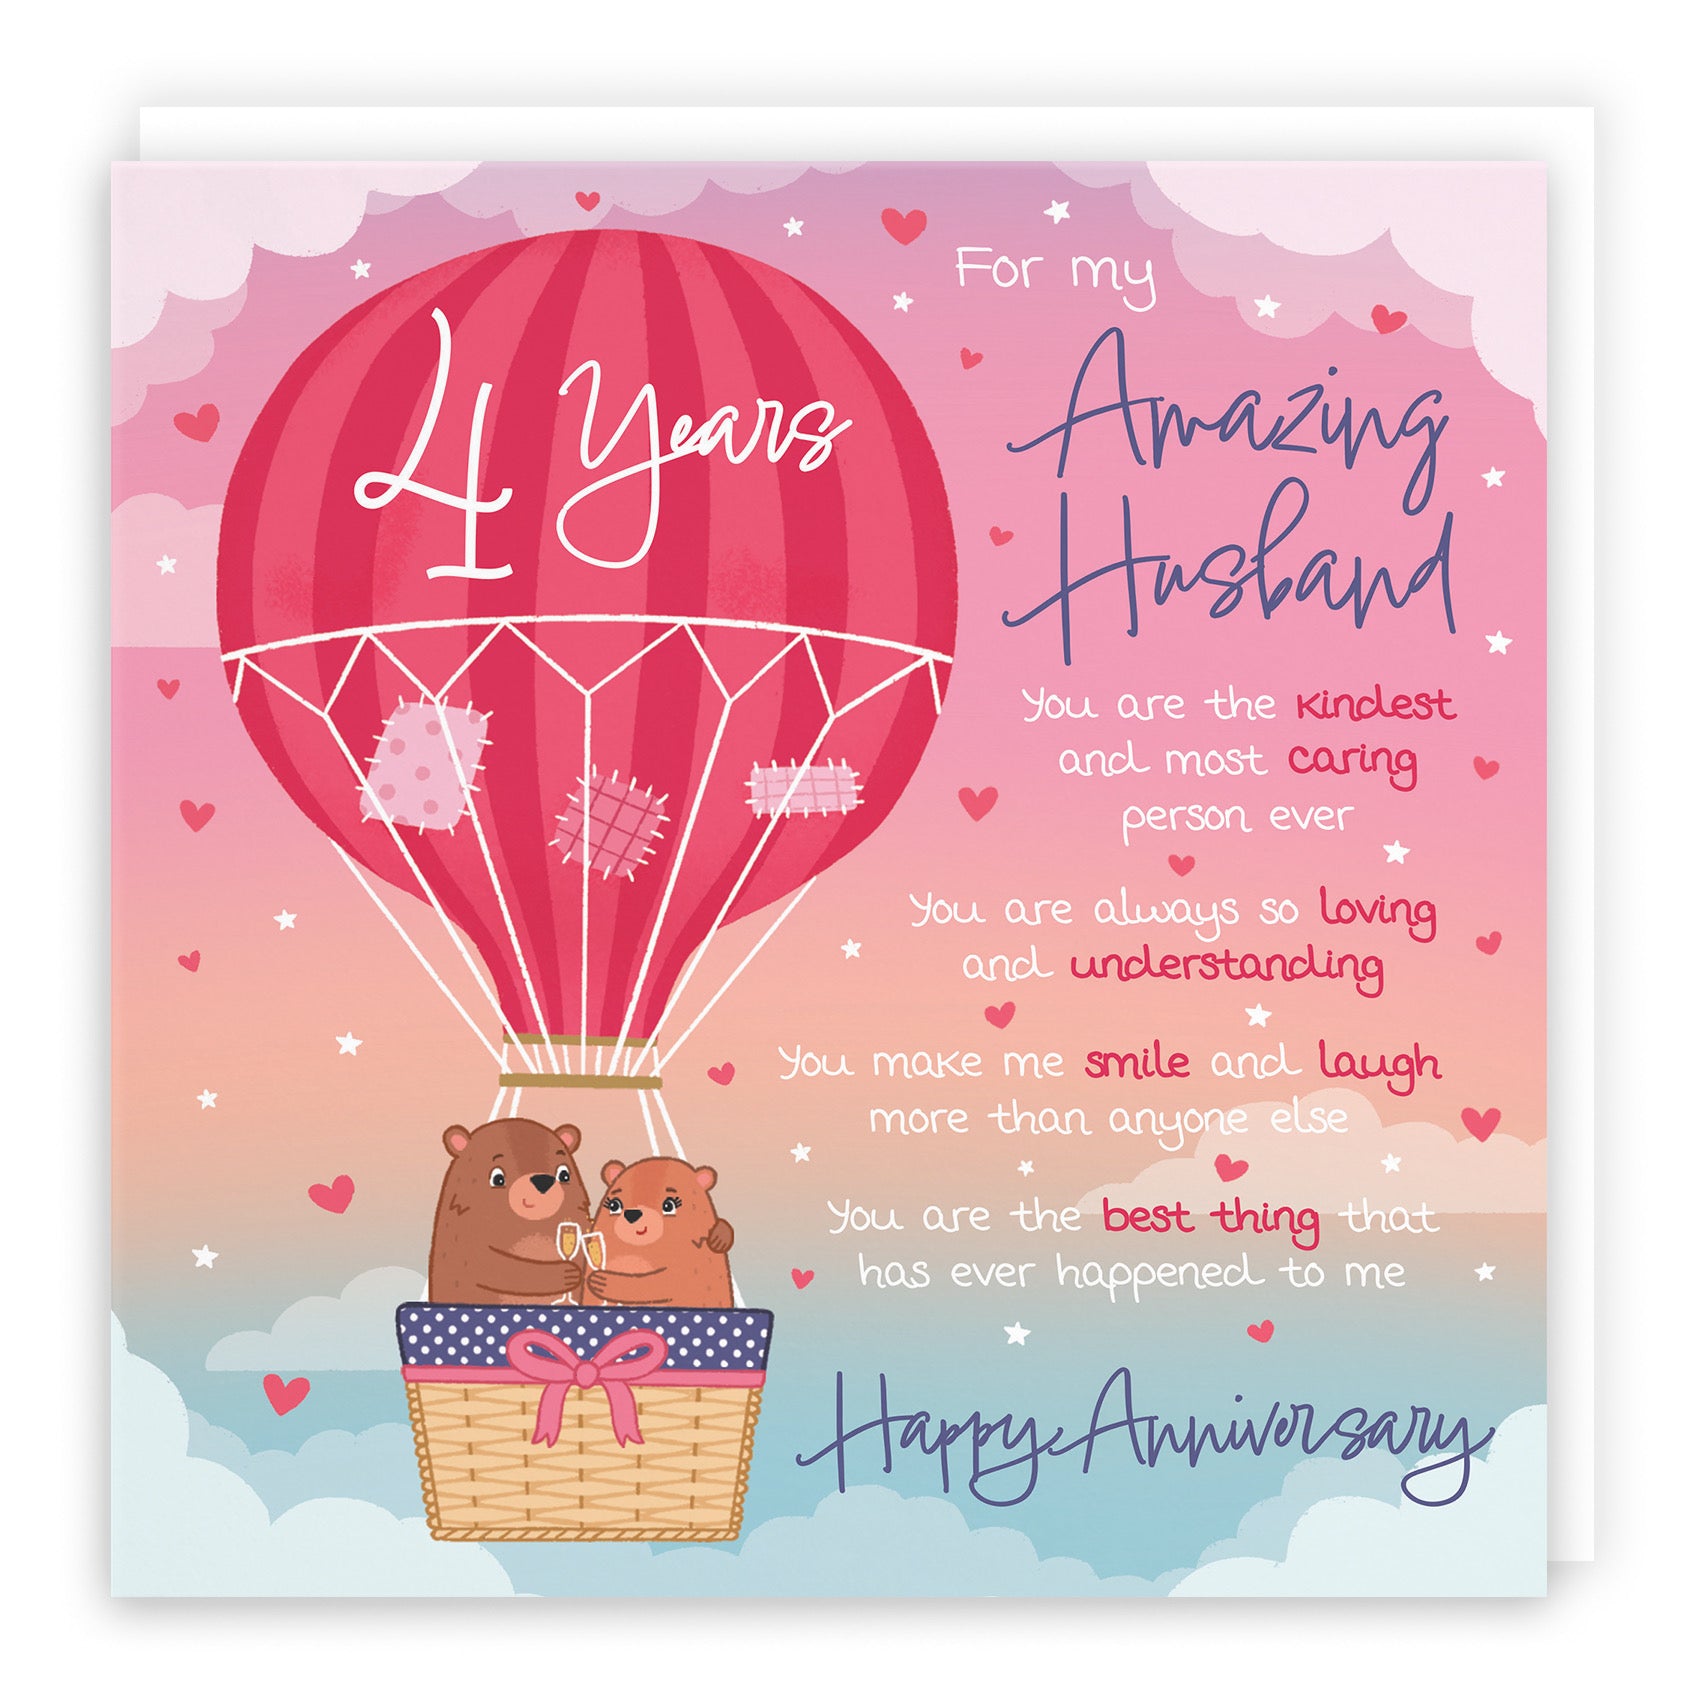 Large Husband 4th Anniversary Poem Card Love Is In The Air Cute Bears - Default Title (B0CXY6MLYH)